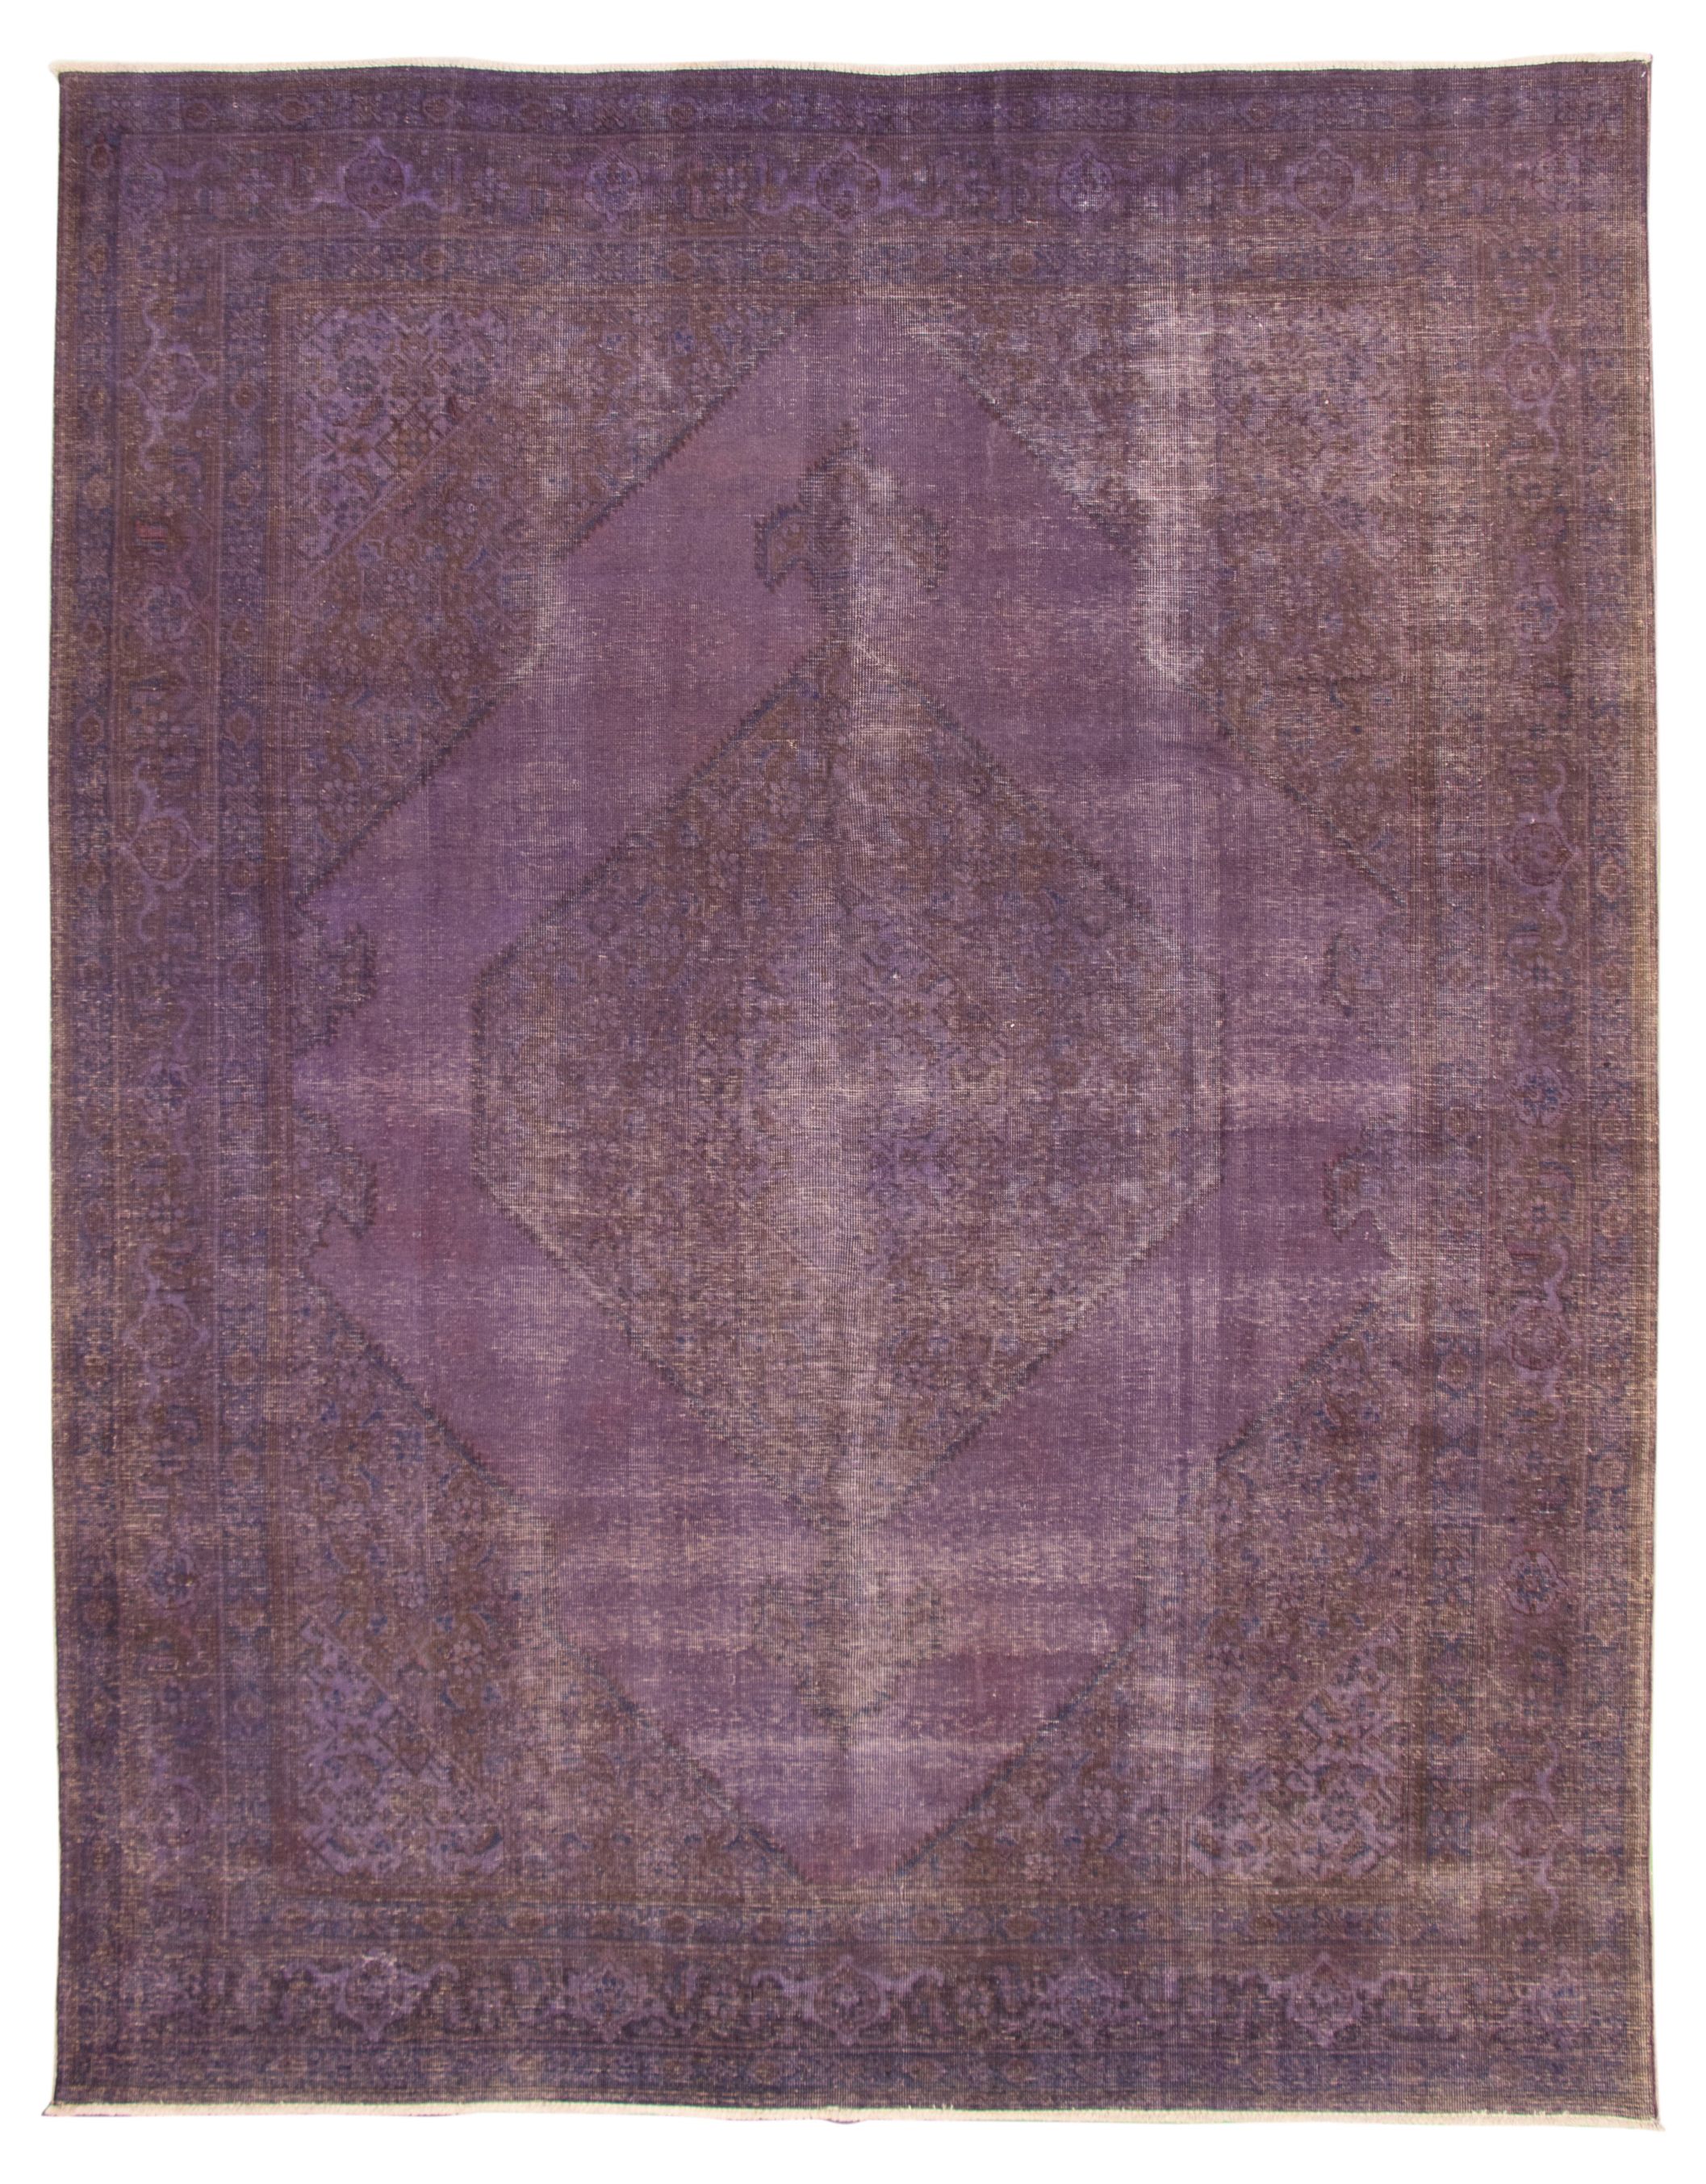 Hand-knotted Color Transition Indigo Wool Rug 9'9" x 12'5" Size: 9'9" x 12'5"  